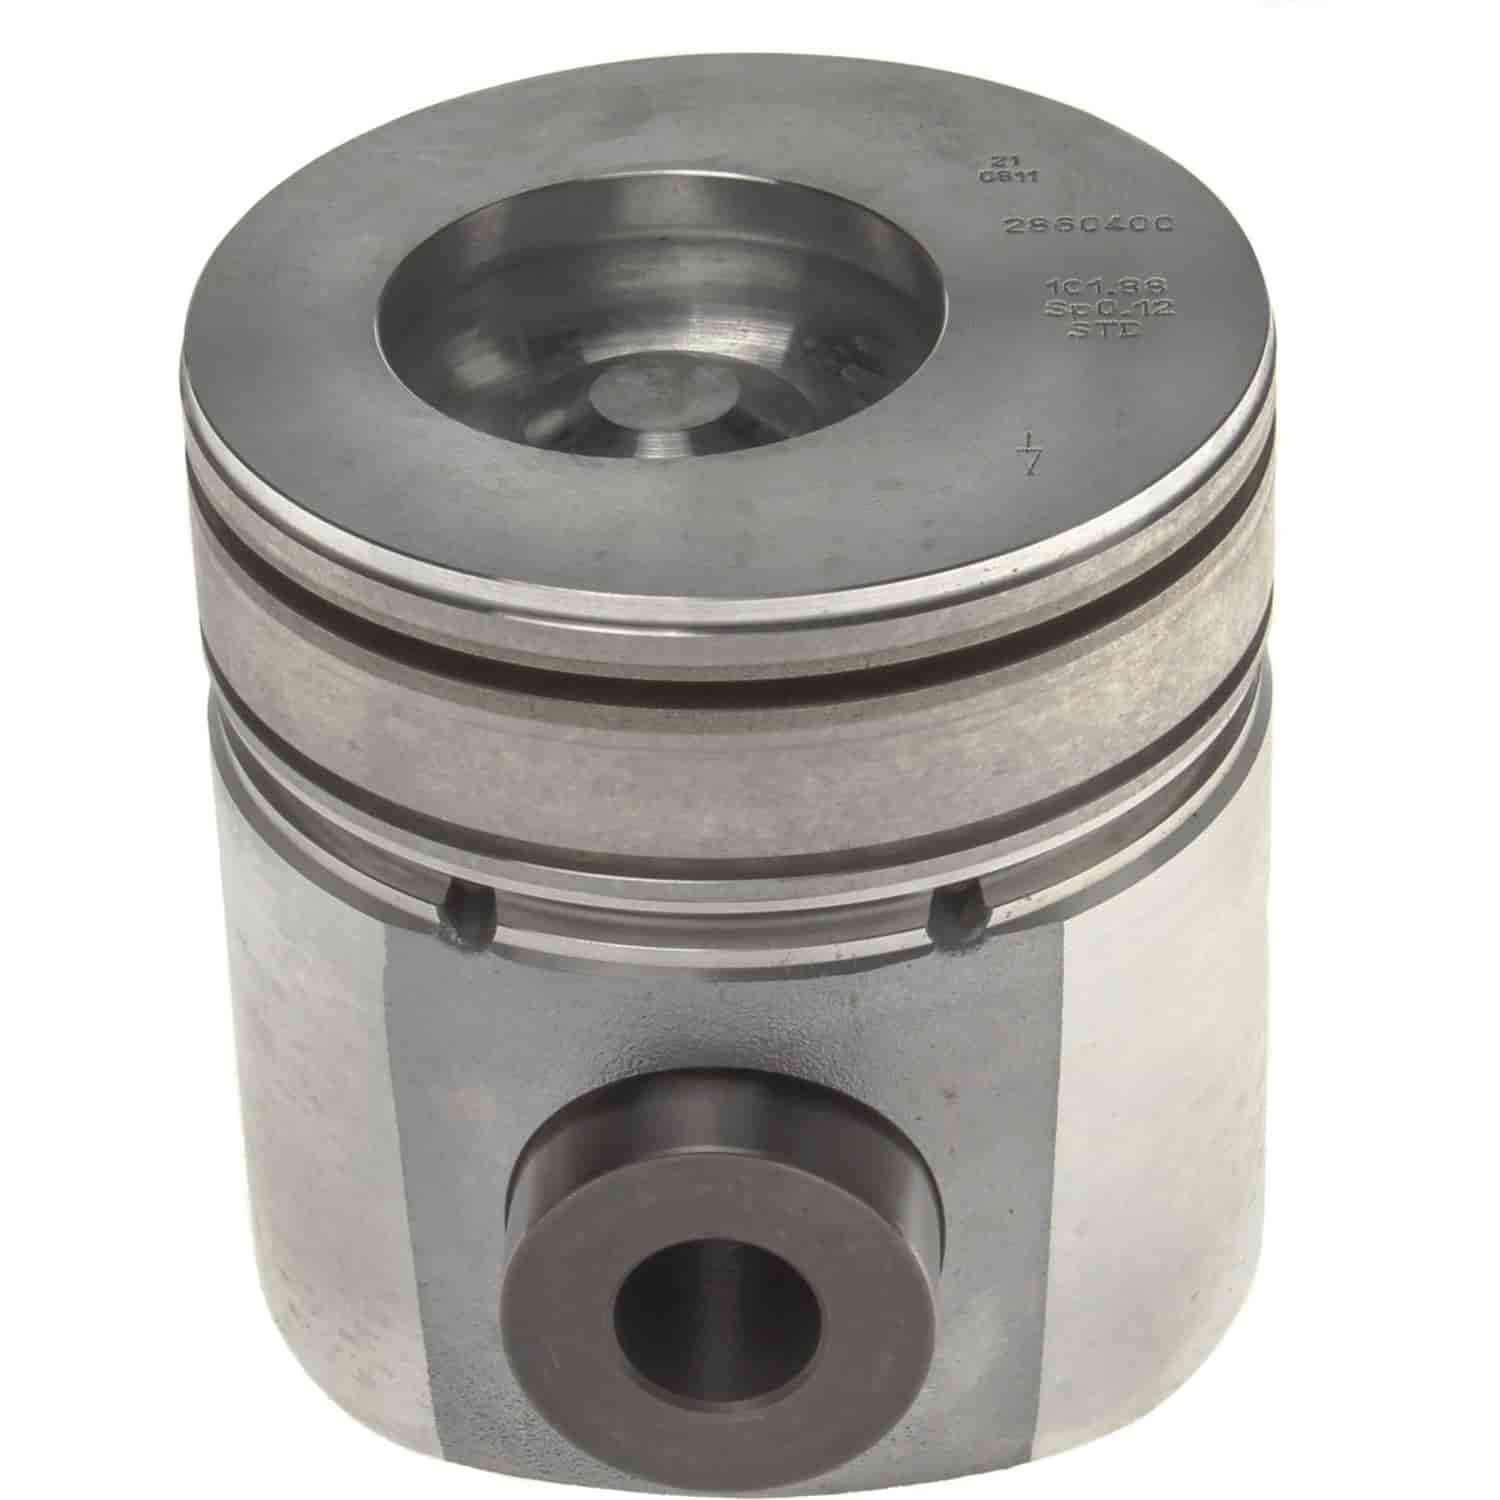 Piston and Rings Set 1994-1998 Dodge, Fits Cummins Diesel L6 5.9L with 4.036" Bore (+.020")